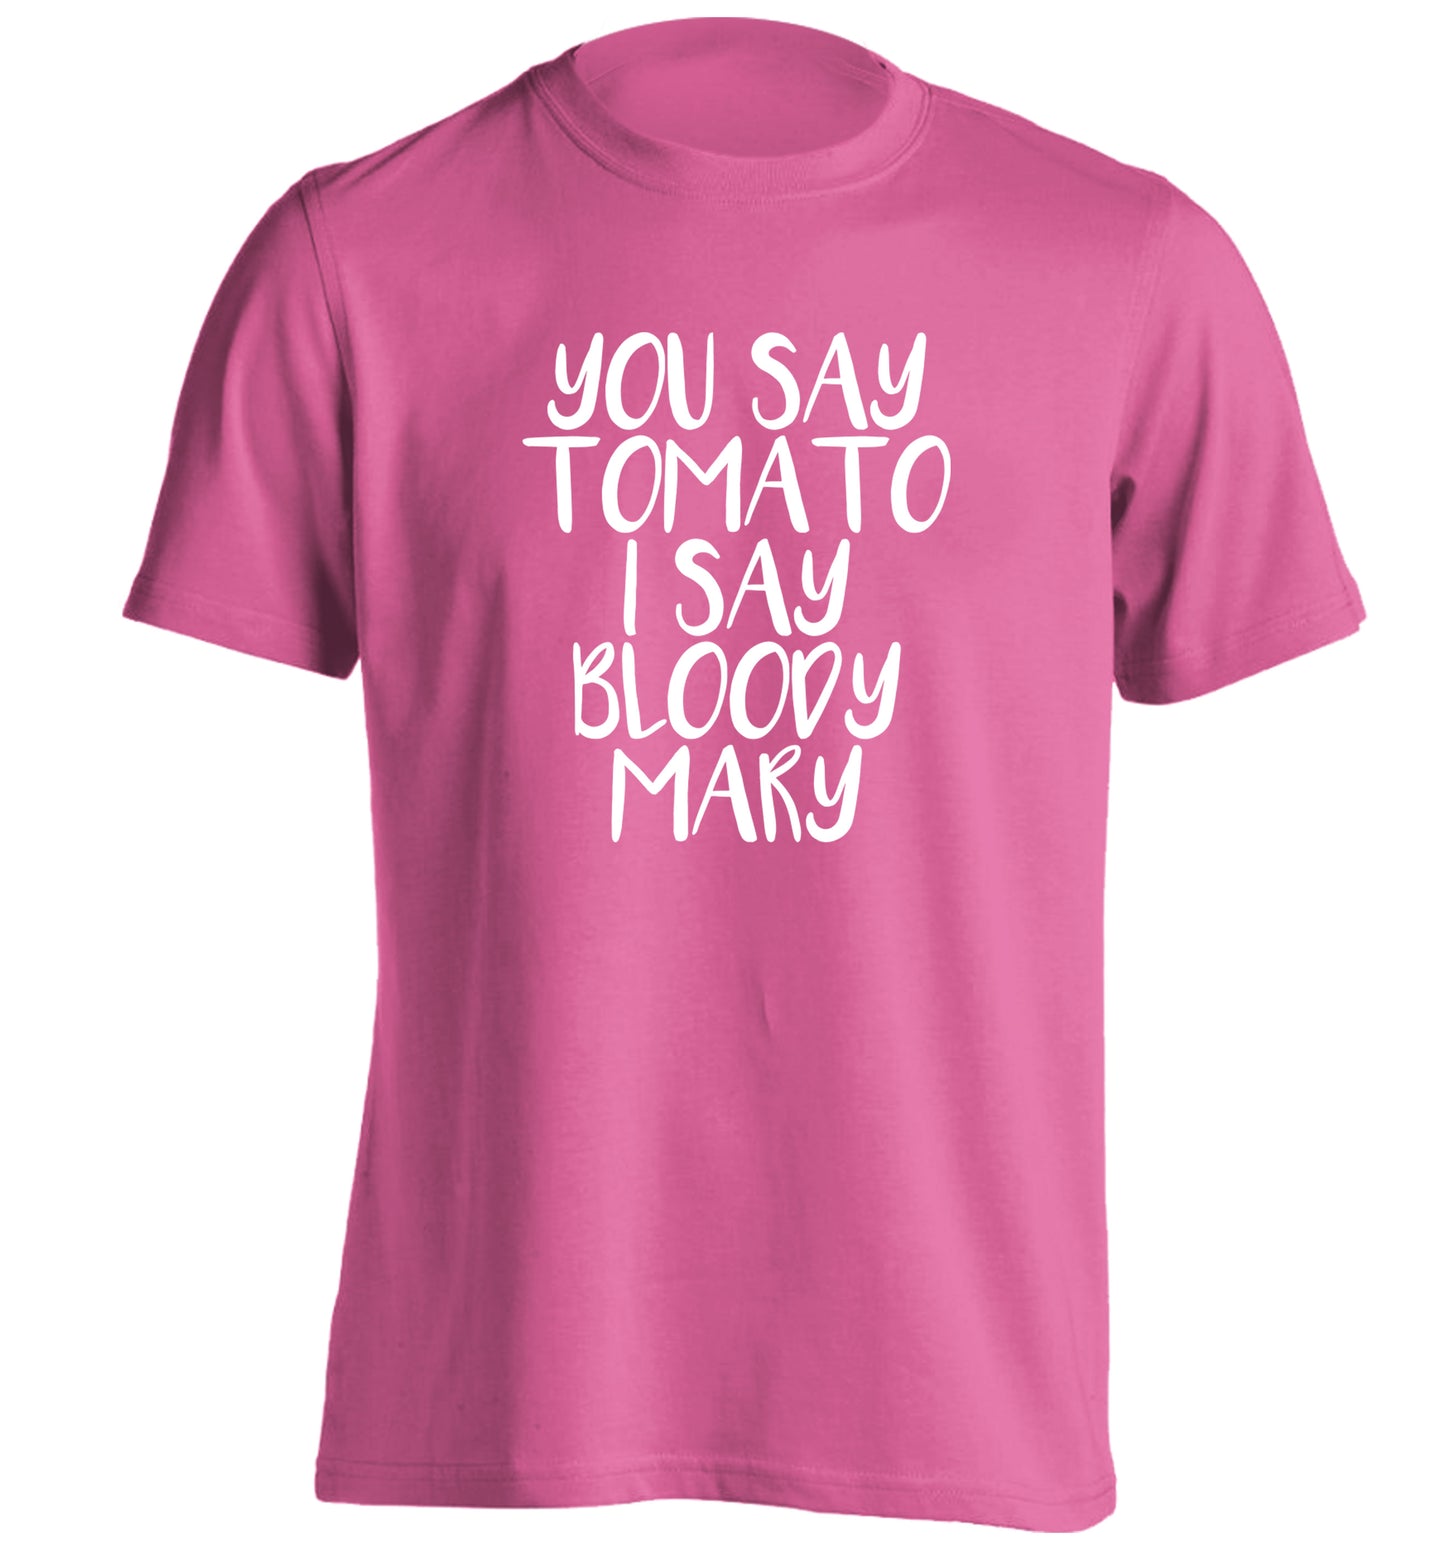 You say tomato I say bloody mary adults unisex pink Tshirt 2XL